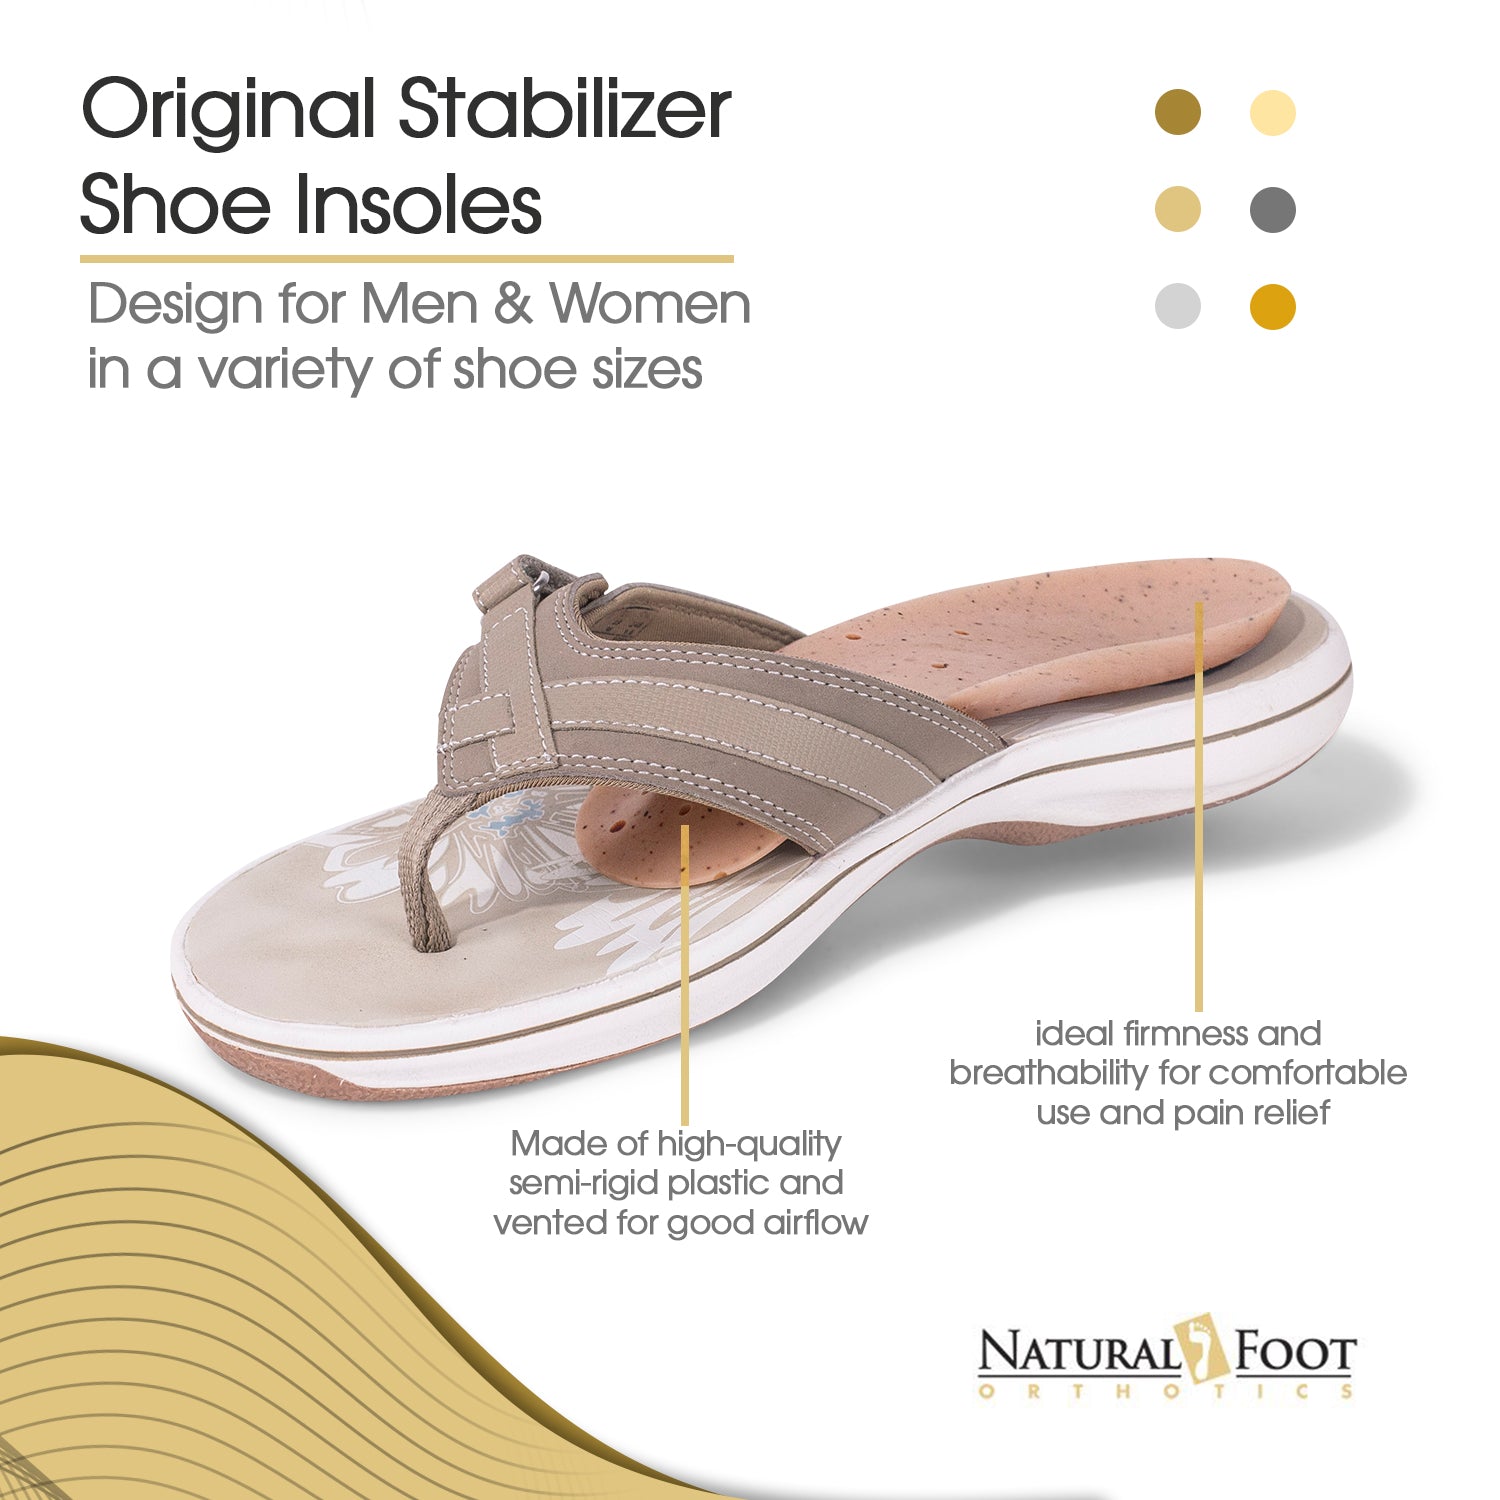 Original Orthotic Stabilizer | Insoles Designed for High Arches